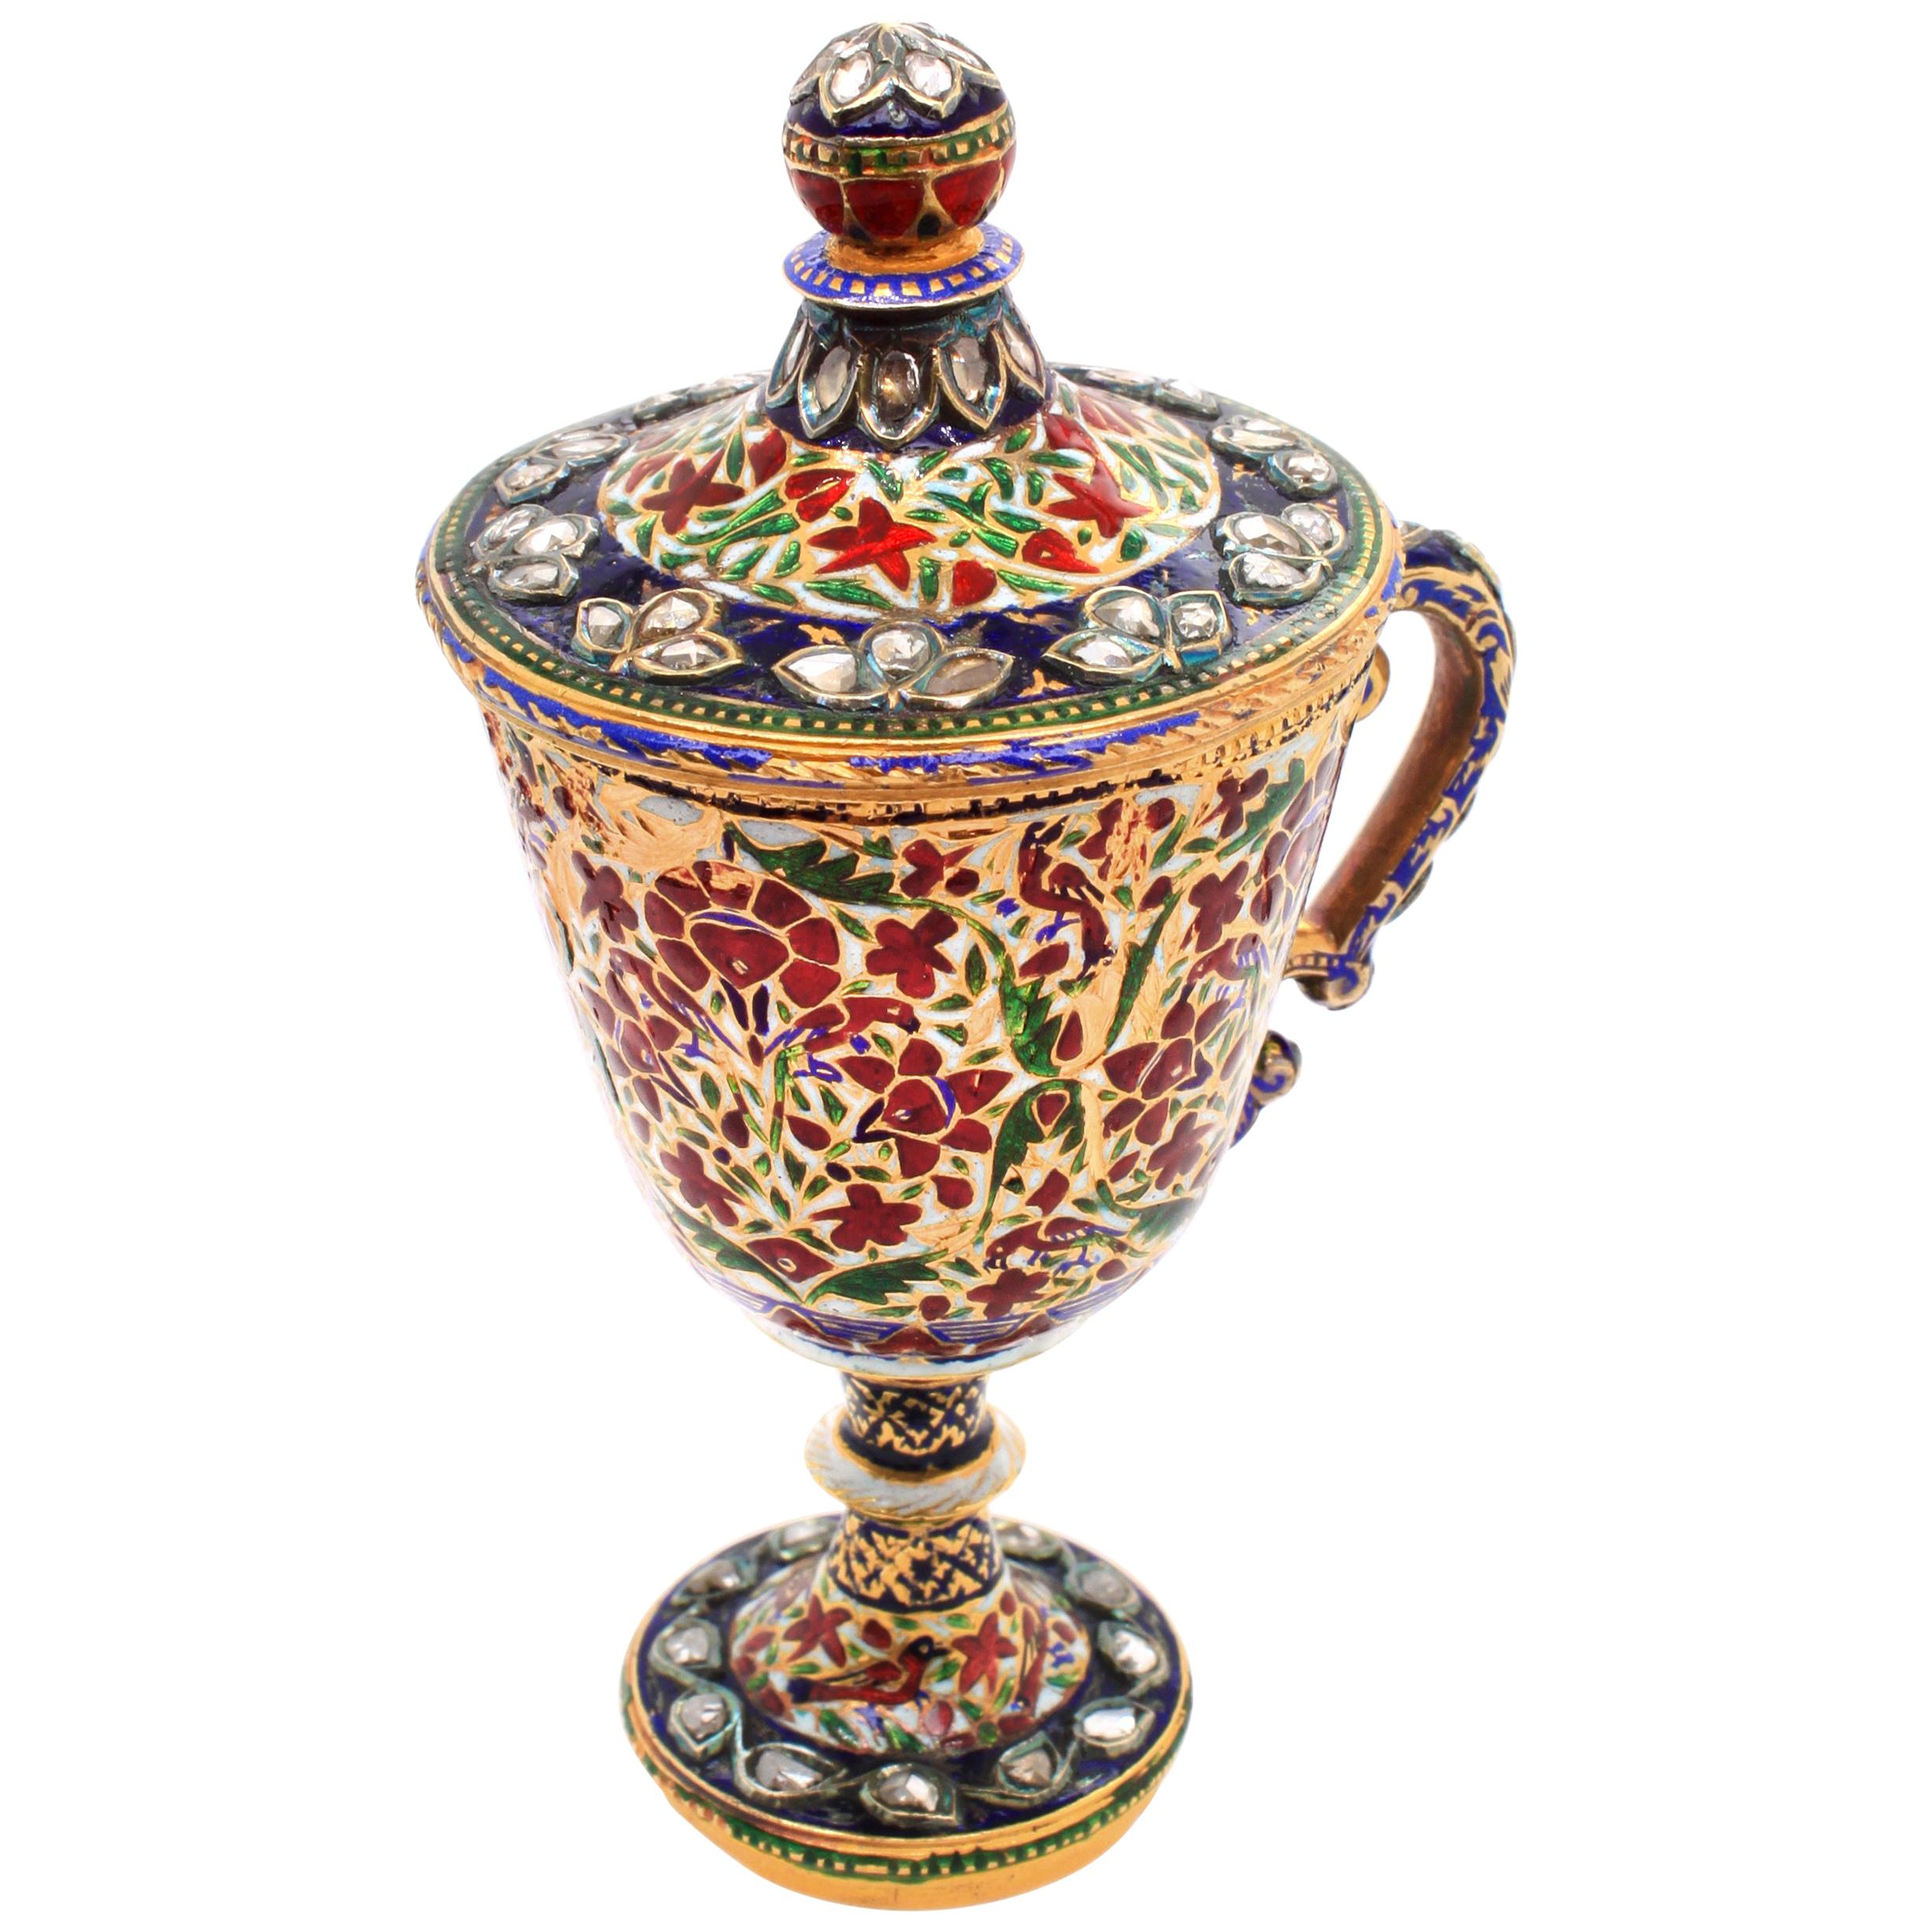 Rare Mughal Enamel and Diamond Cup, Early 19th Century For Sale